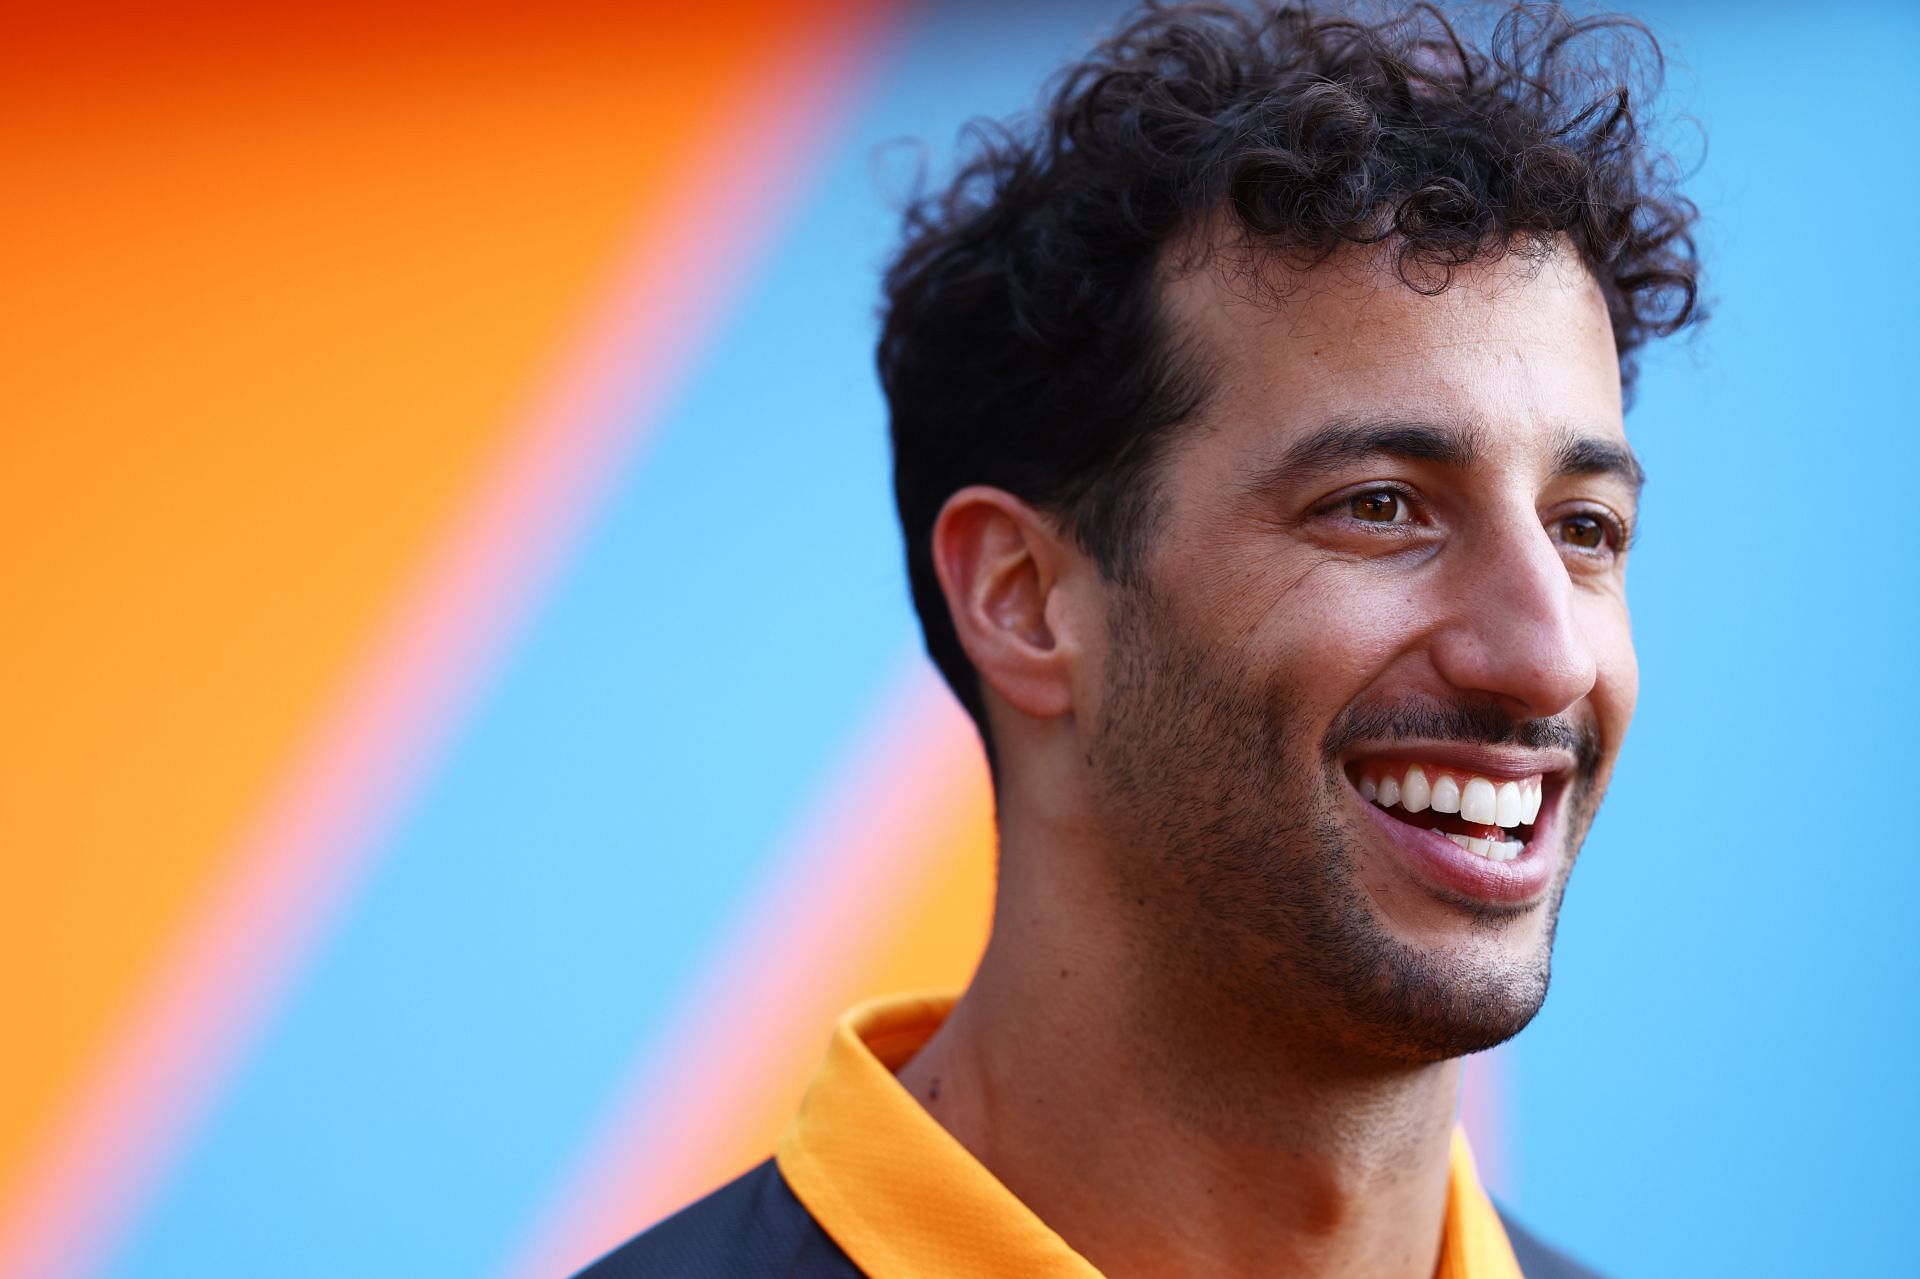 Daniel Ricciardo looks on in the Paddock during previews ahead of the F1 Grand Prix of Hungary at Hungaroring on July 28, 2022, in Budapest, Hungary. (Photo by Francois Nel/Getty Images)